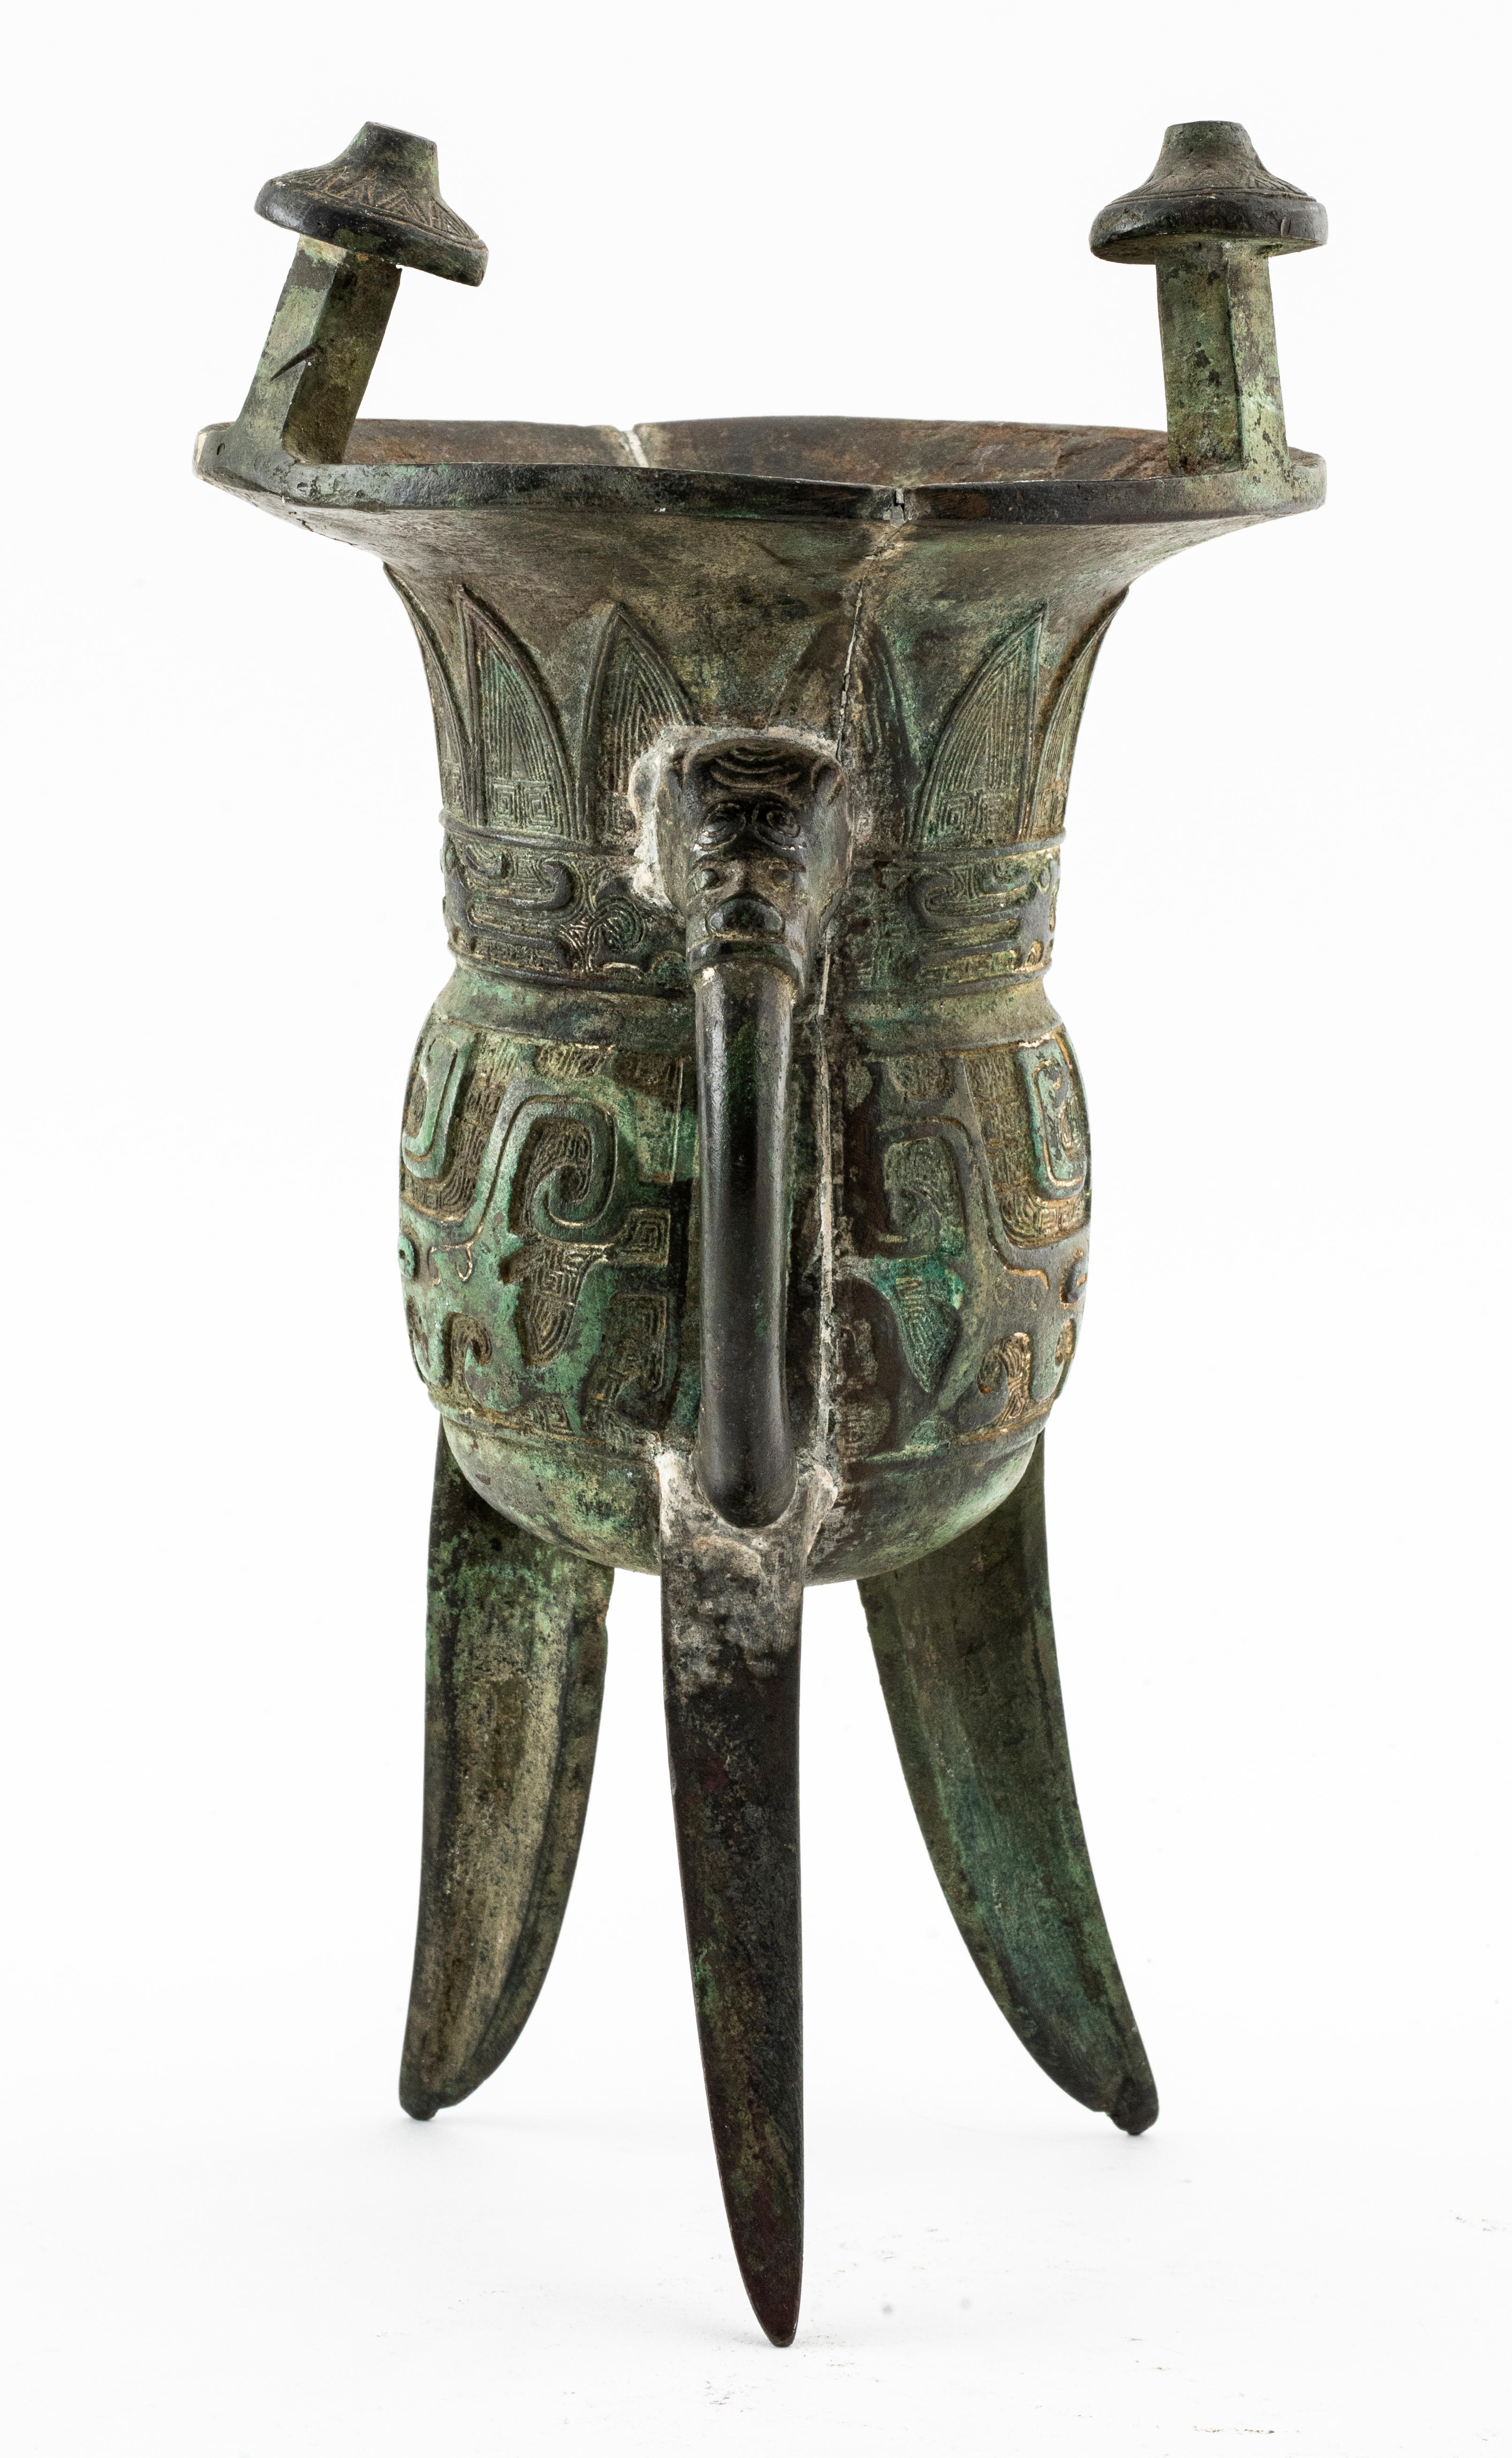 Chinese archaic style jue bronze libation vessel. The bublous body raised on tripod blade-shaped supports and cast in high relief with a pair of ta'ot'ien masks on a fretwork ground below the wide trumpet neck, with erect leaf-tip motifs, a loop